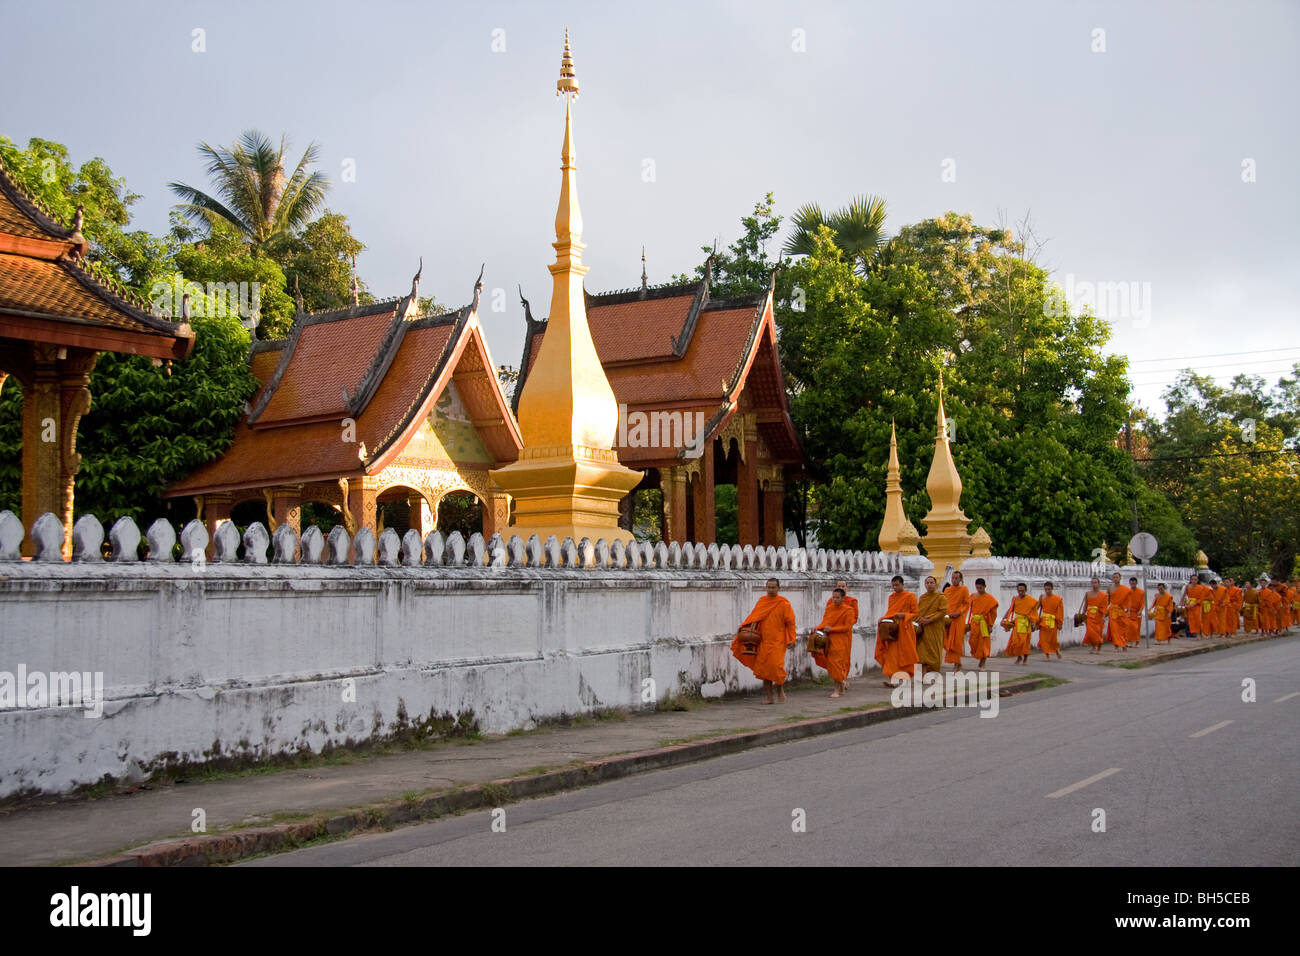 Buddhist monks collecting offerings of Alms, Luang Prabang Stock Photo